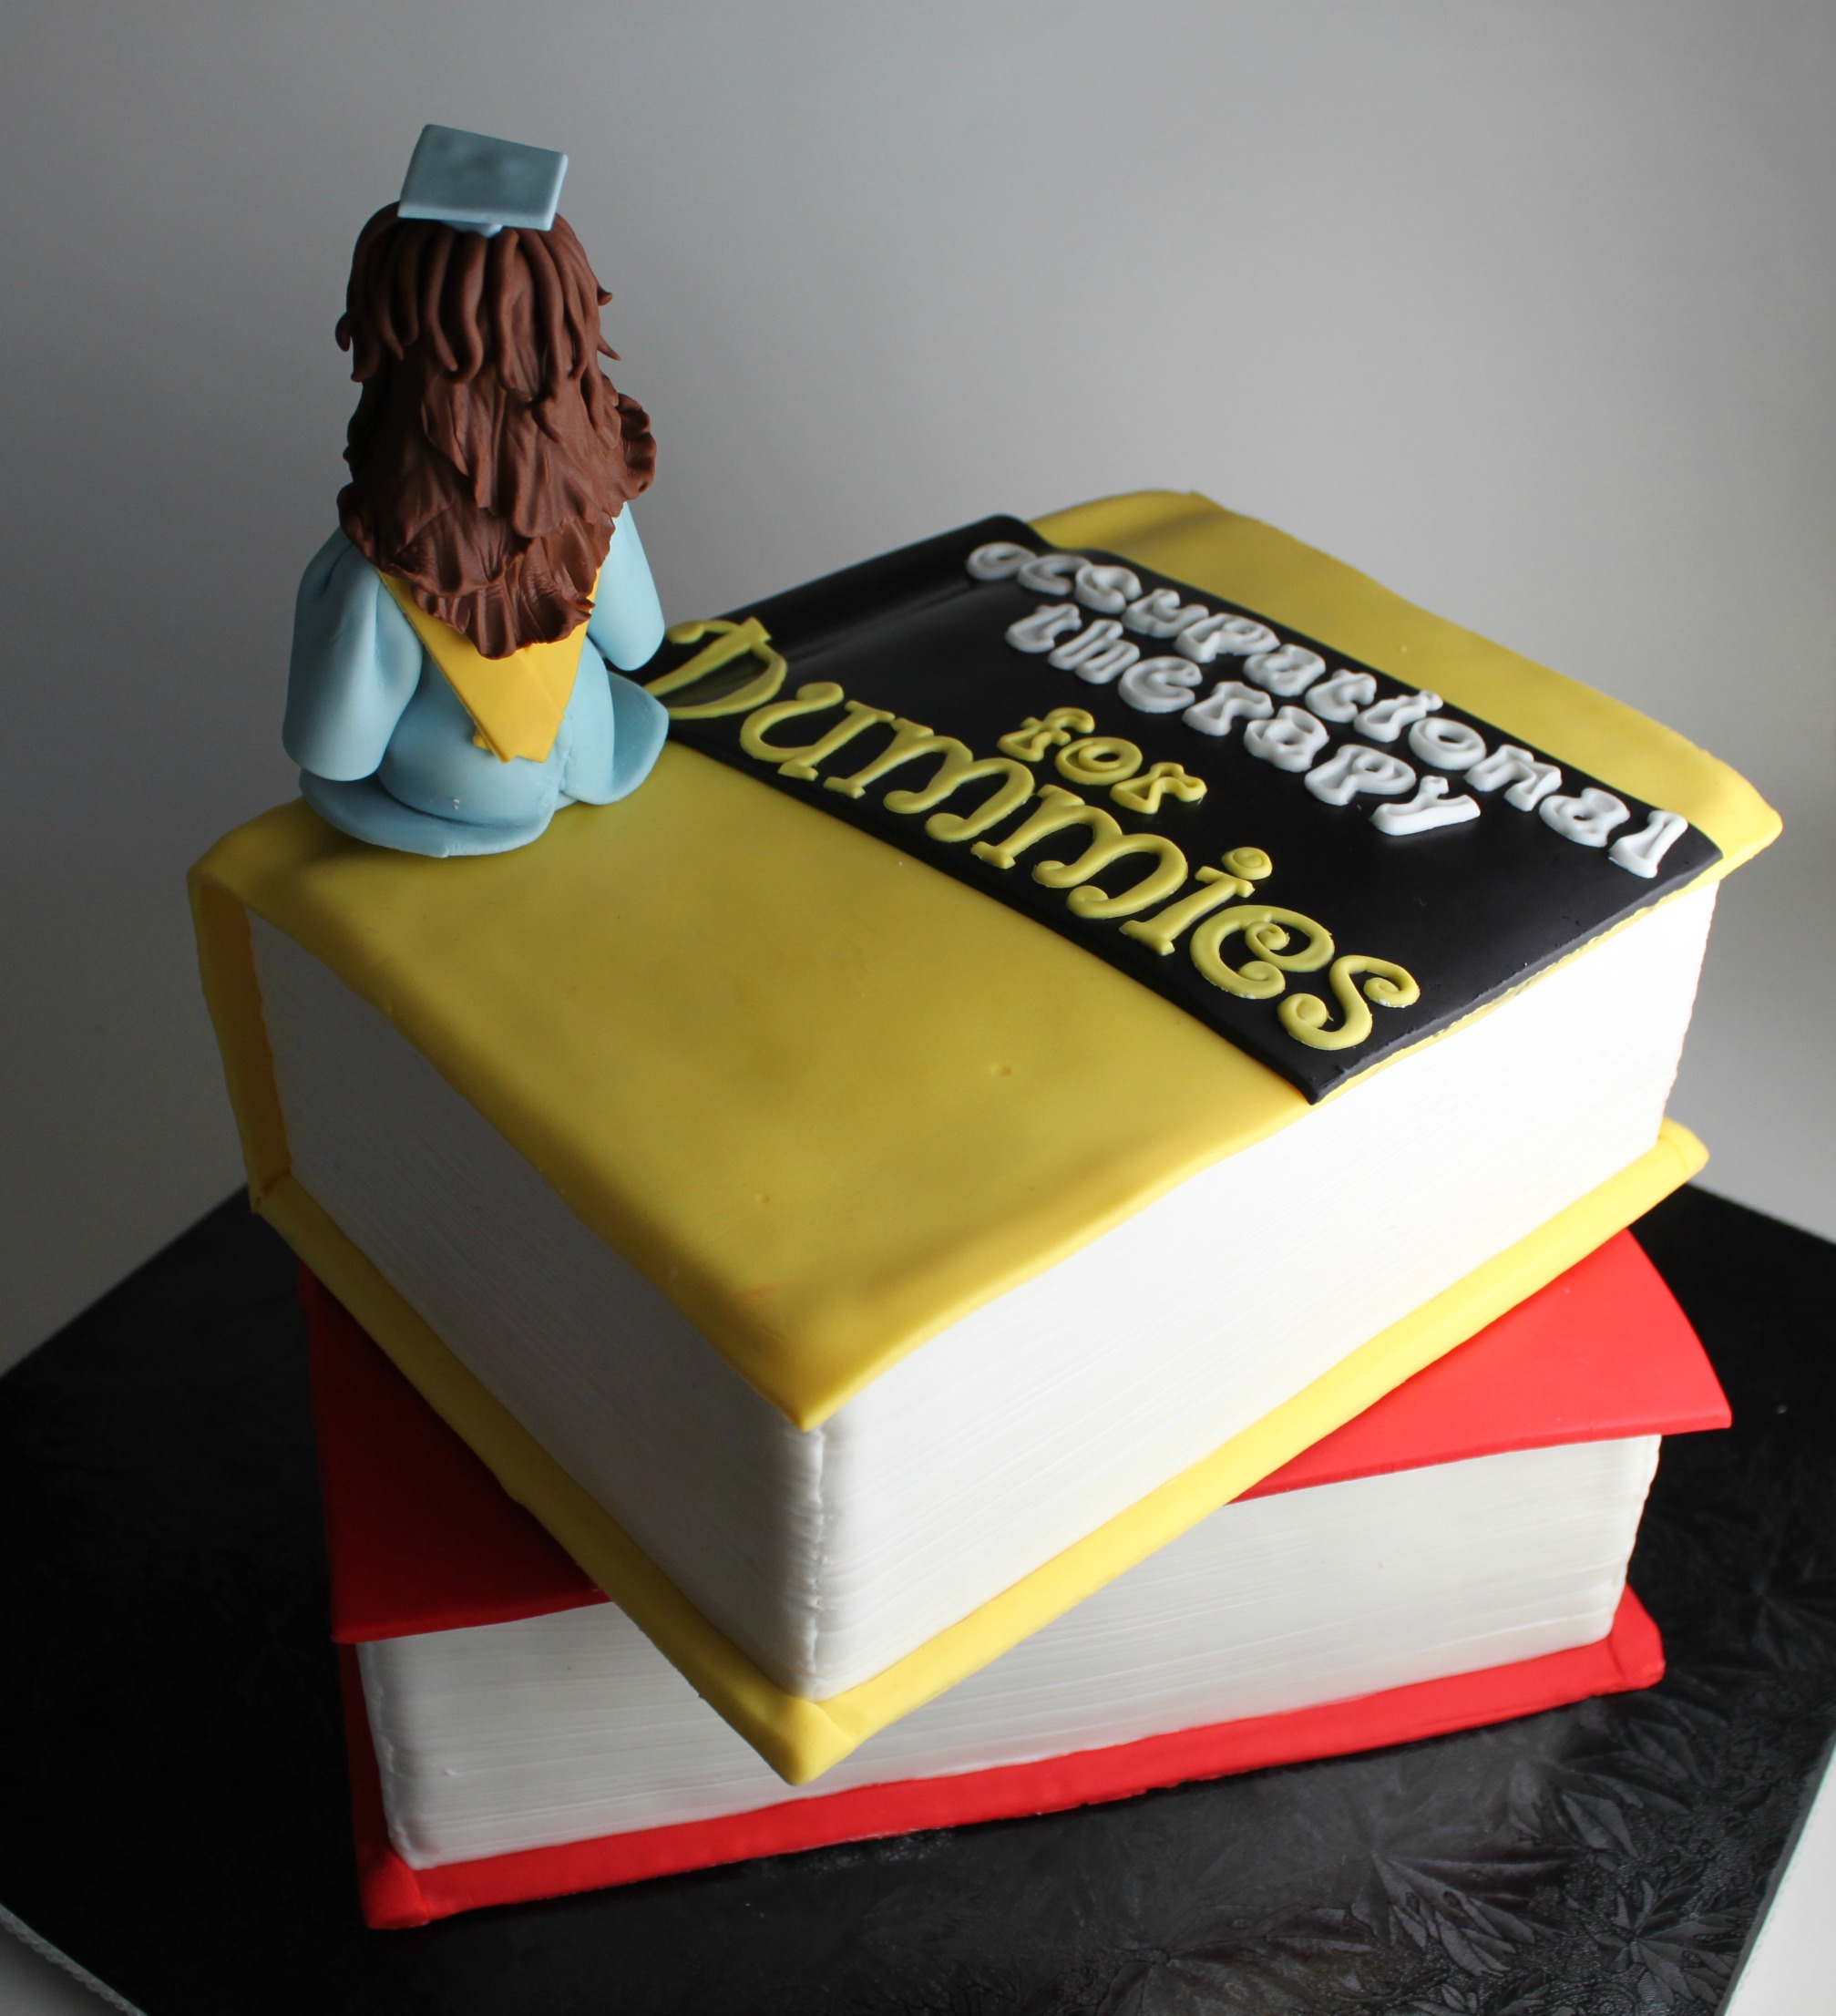 6 Photos of High School Graduation Cakes With Books